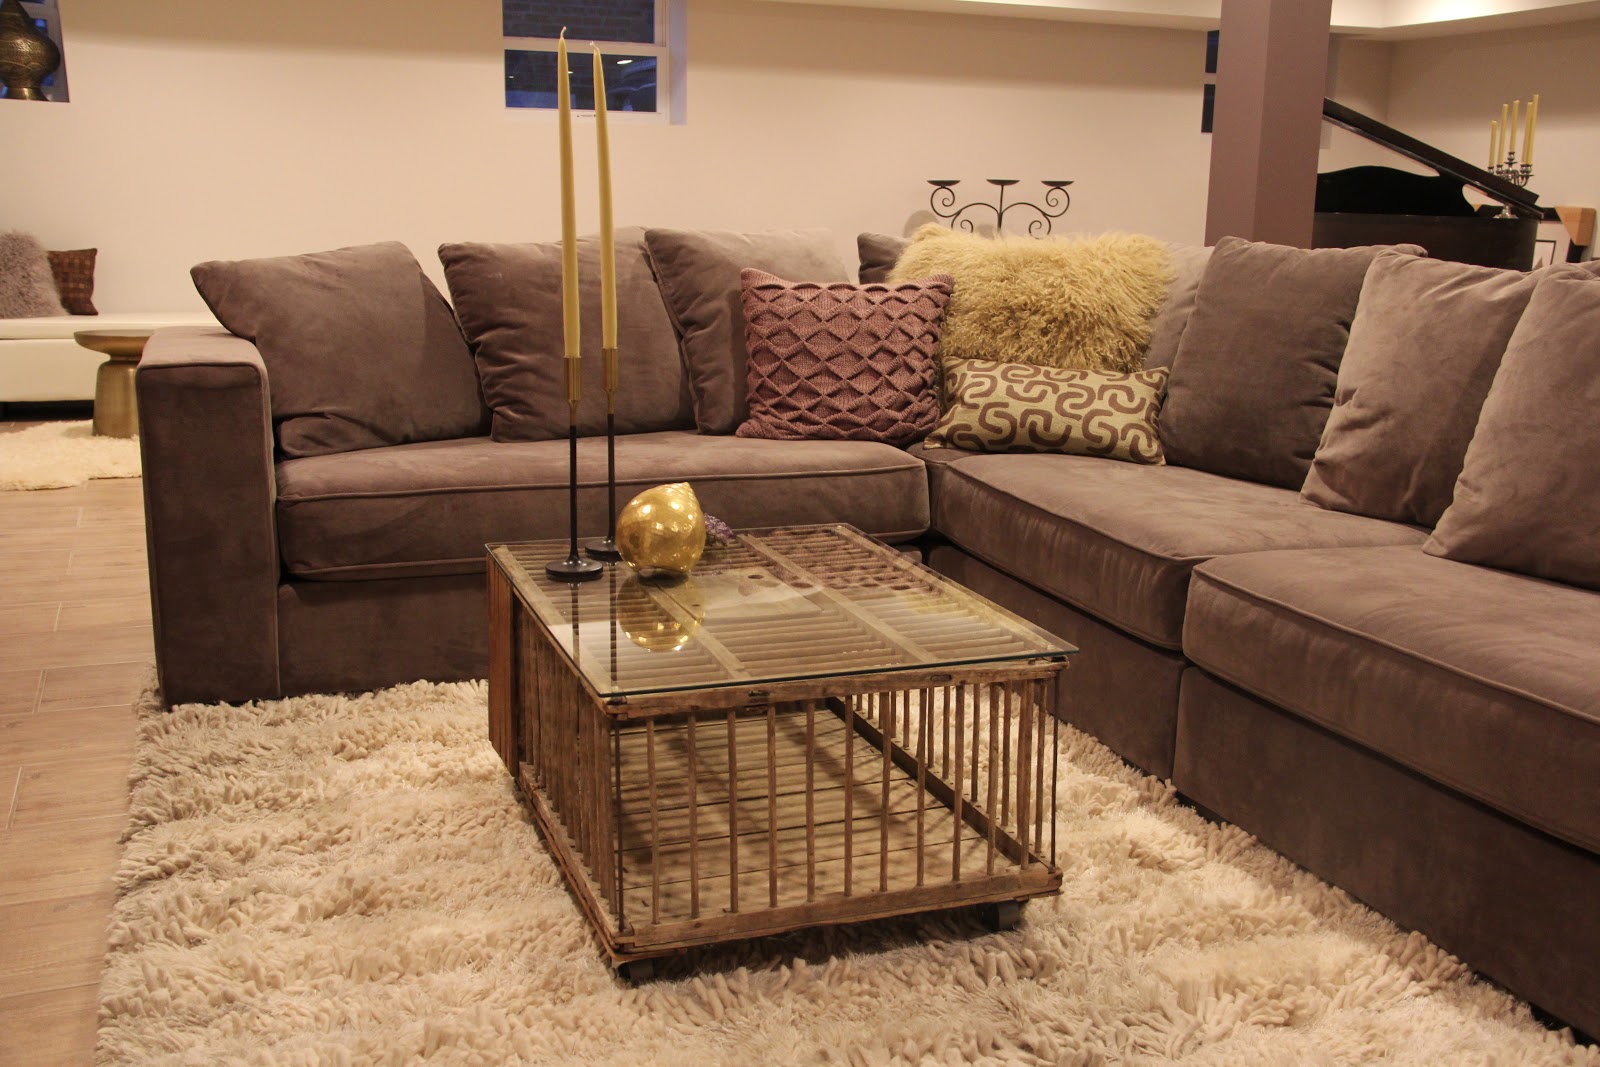 Sheer Serendipity: Chicken coop turned coffee table